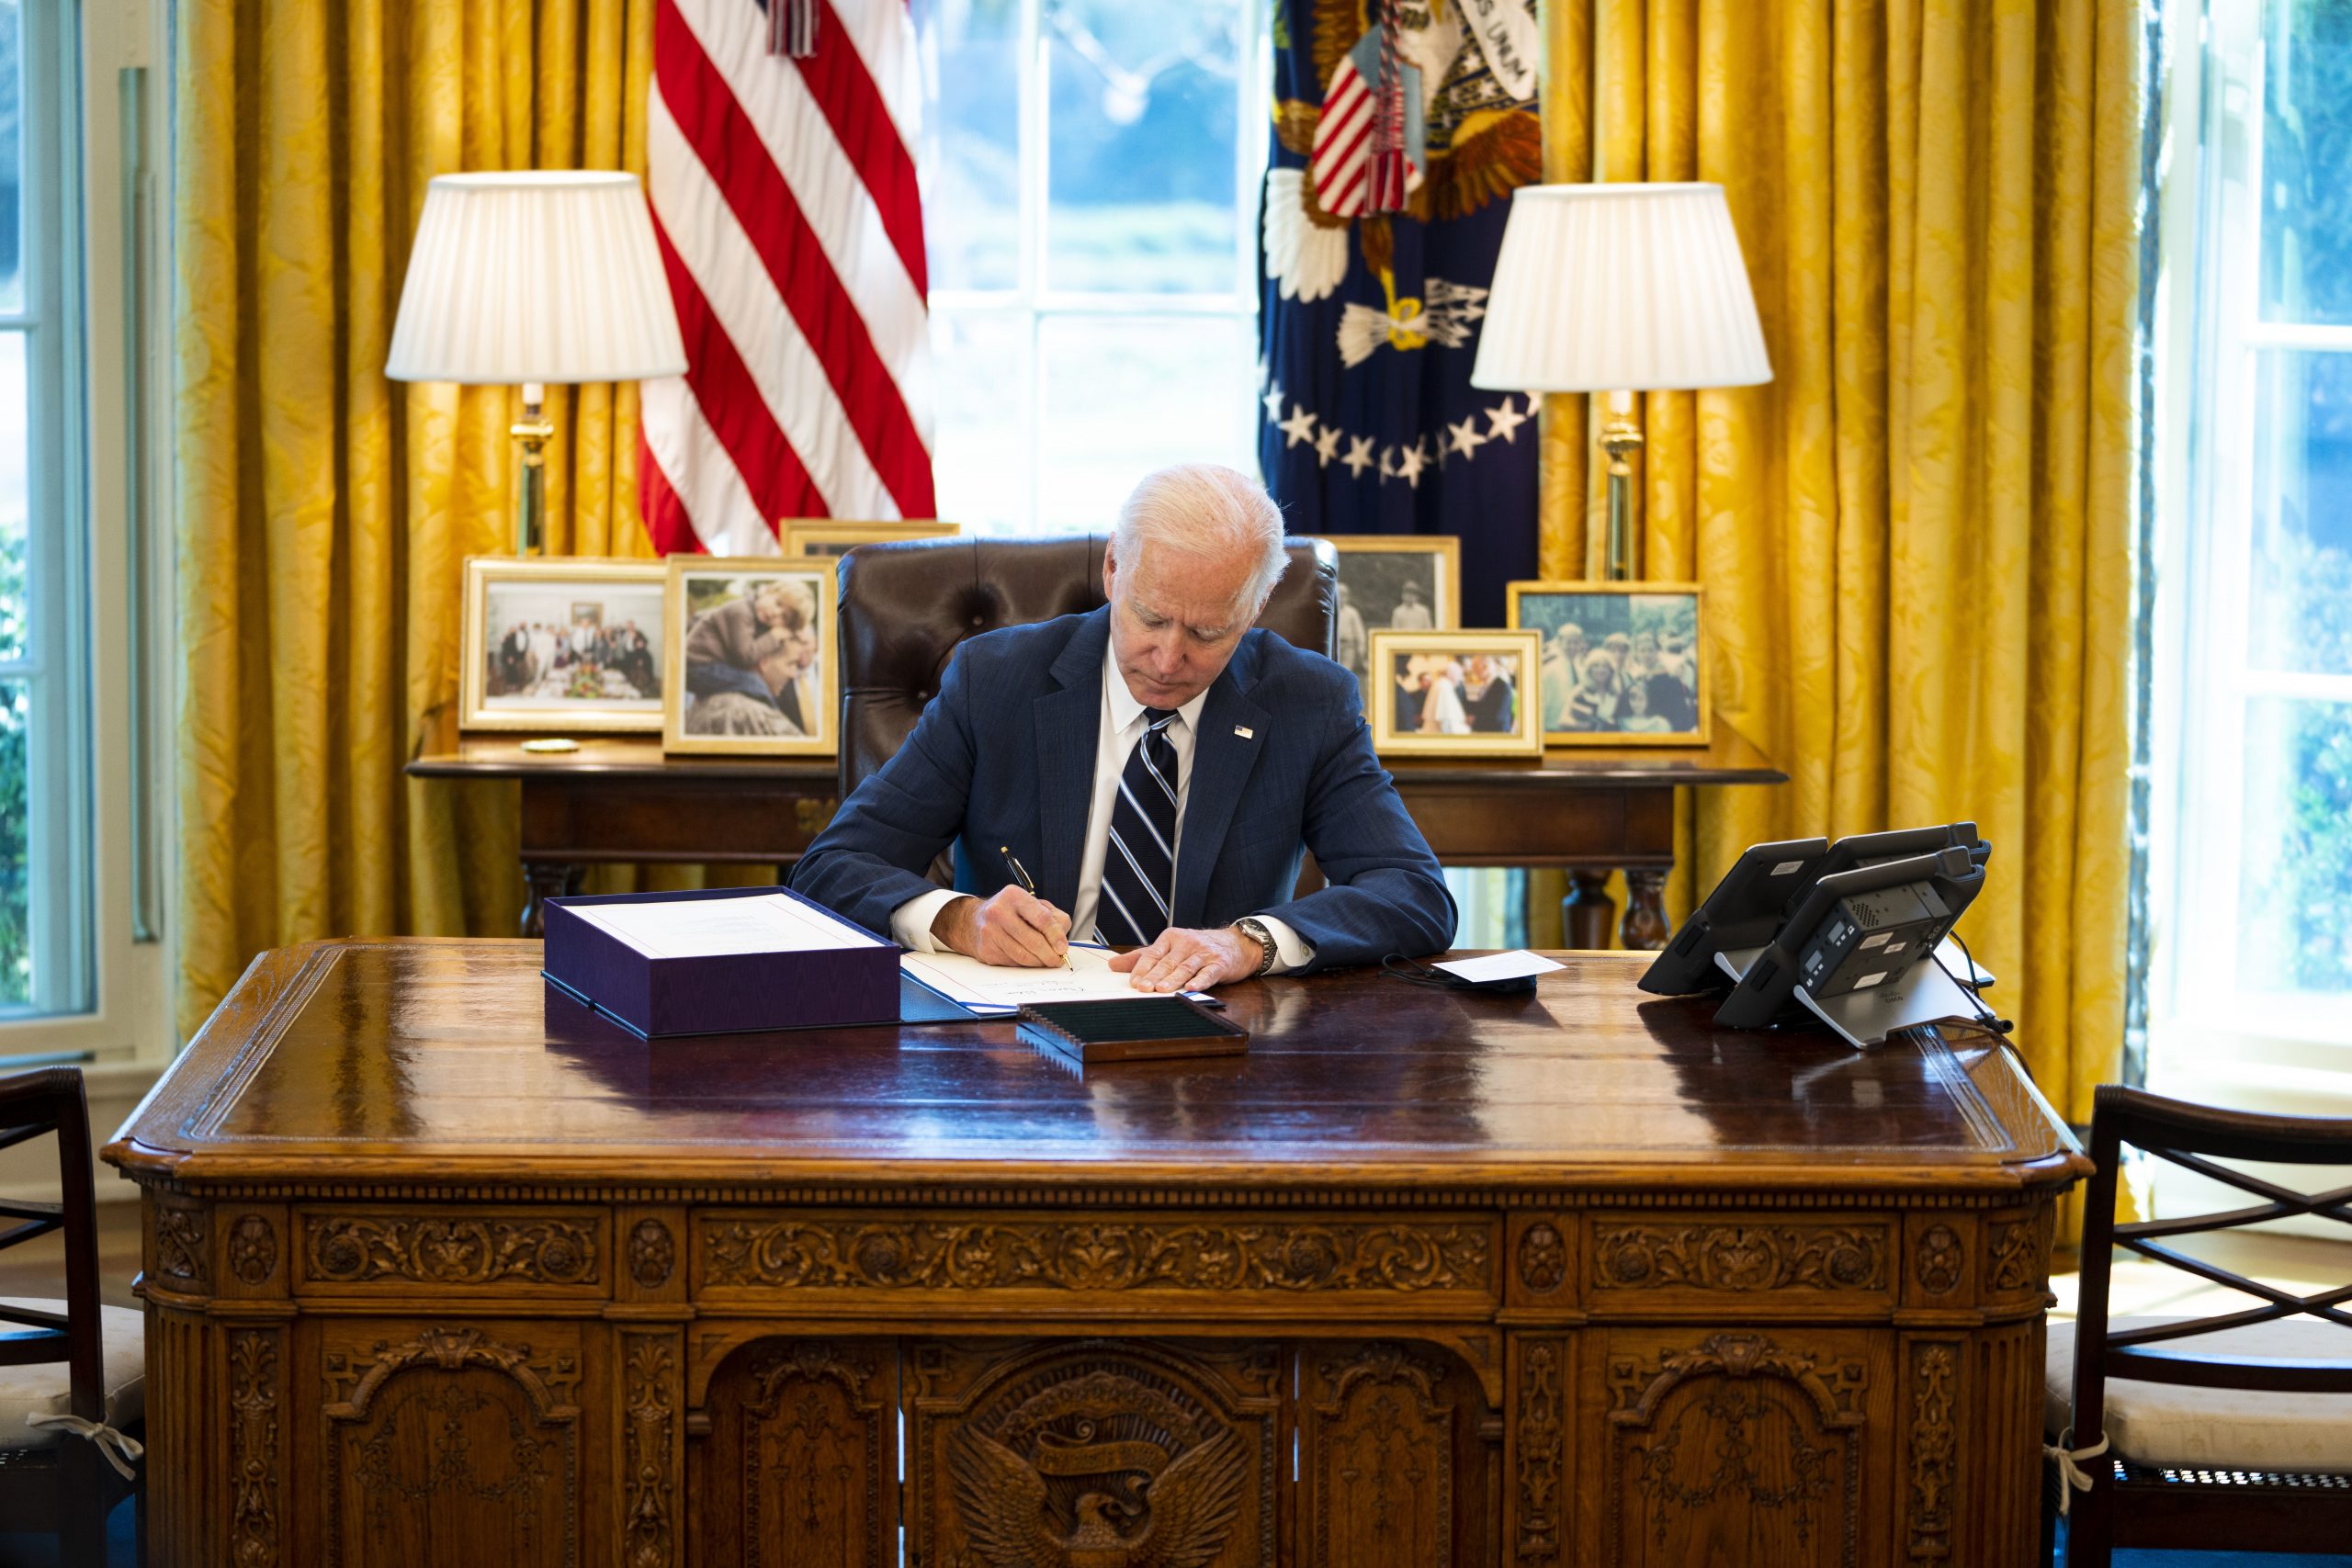 epa09068462 US President Joe Biden signs the American Rescue Plan in the Oval Office, in the White House, Washington, DC, USA, 11 March 2021.  EPA/Doug Mills / POOL